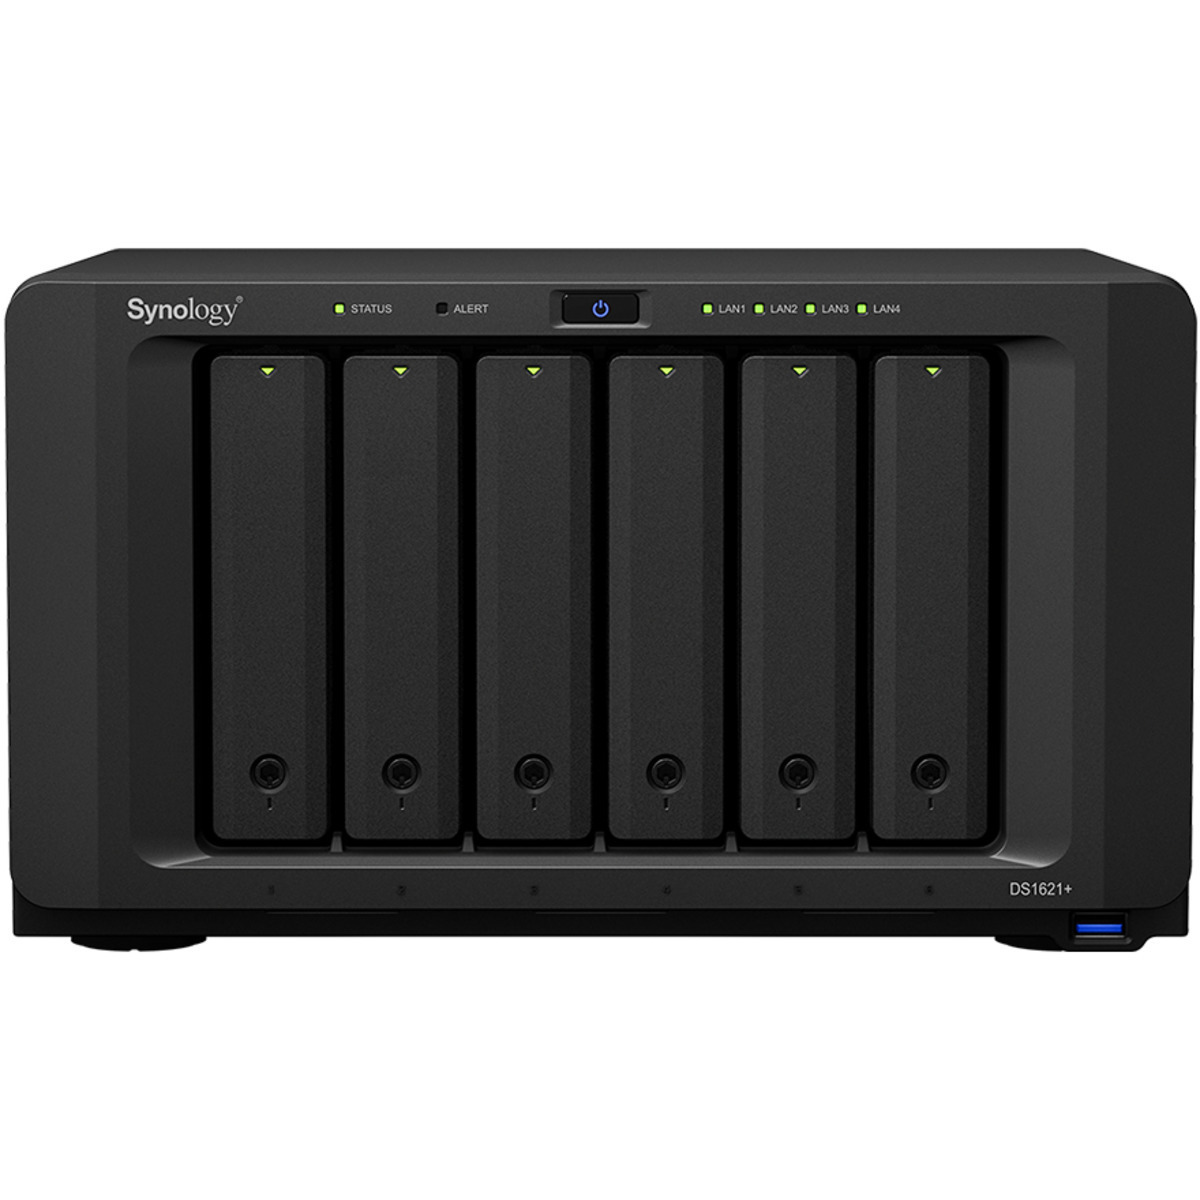 Synology DiskStation DS1621+ 144tb 6-Bay Desktop Multimedia / Power User / Business NAS - Network Attached Storage Device 6x24tb Western Digital Gold WD241KRYZ 3.5 7200rpm SATA 6Gb/s HDD ENTERPRISE Class Drives Installed - Burn-In Tested - FREE RAM UPGRADE DiskStation DS1621+